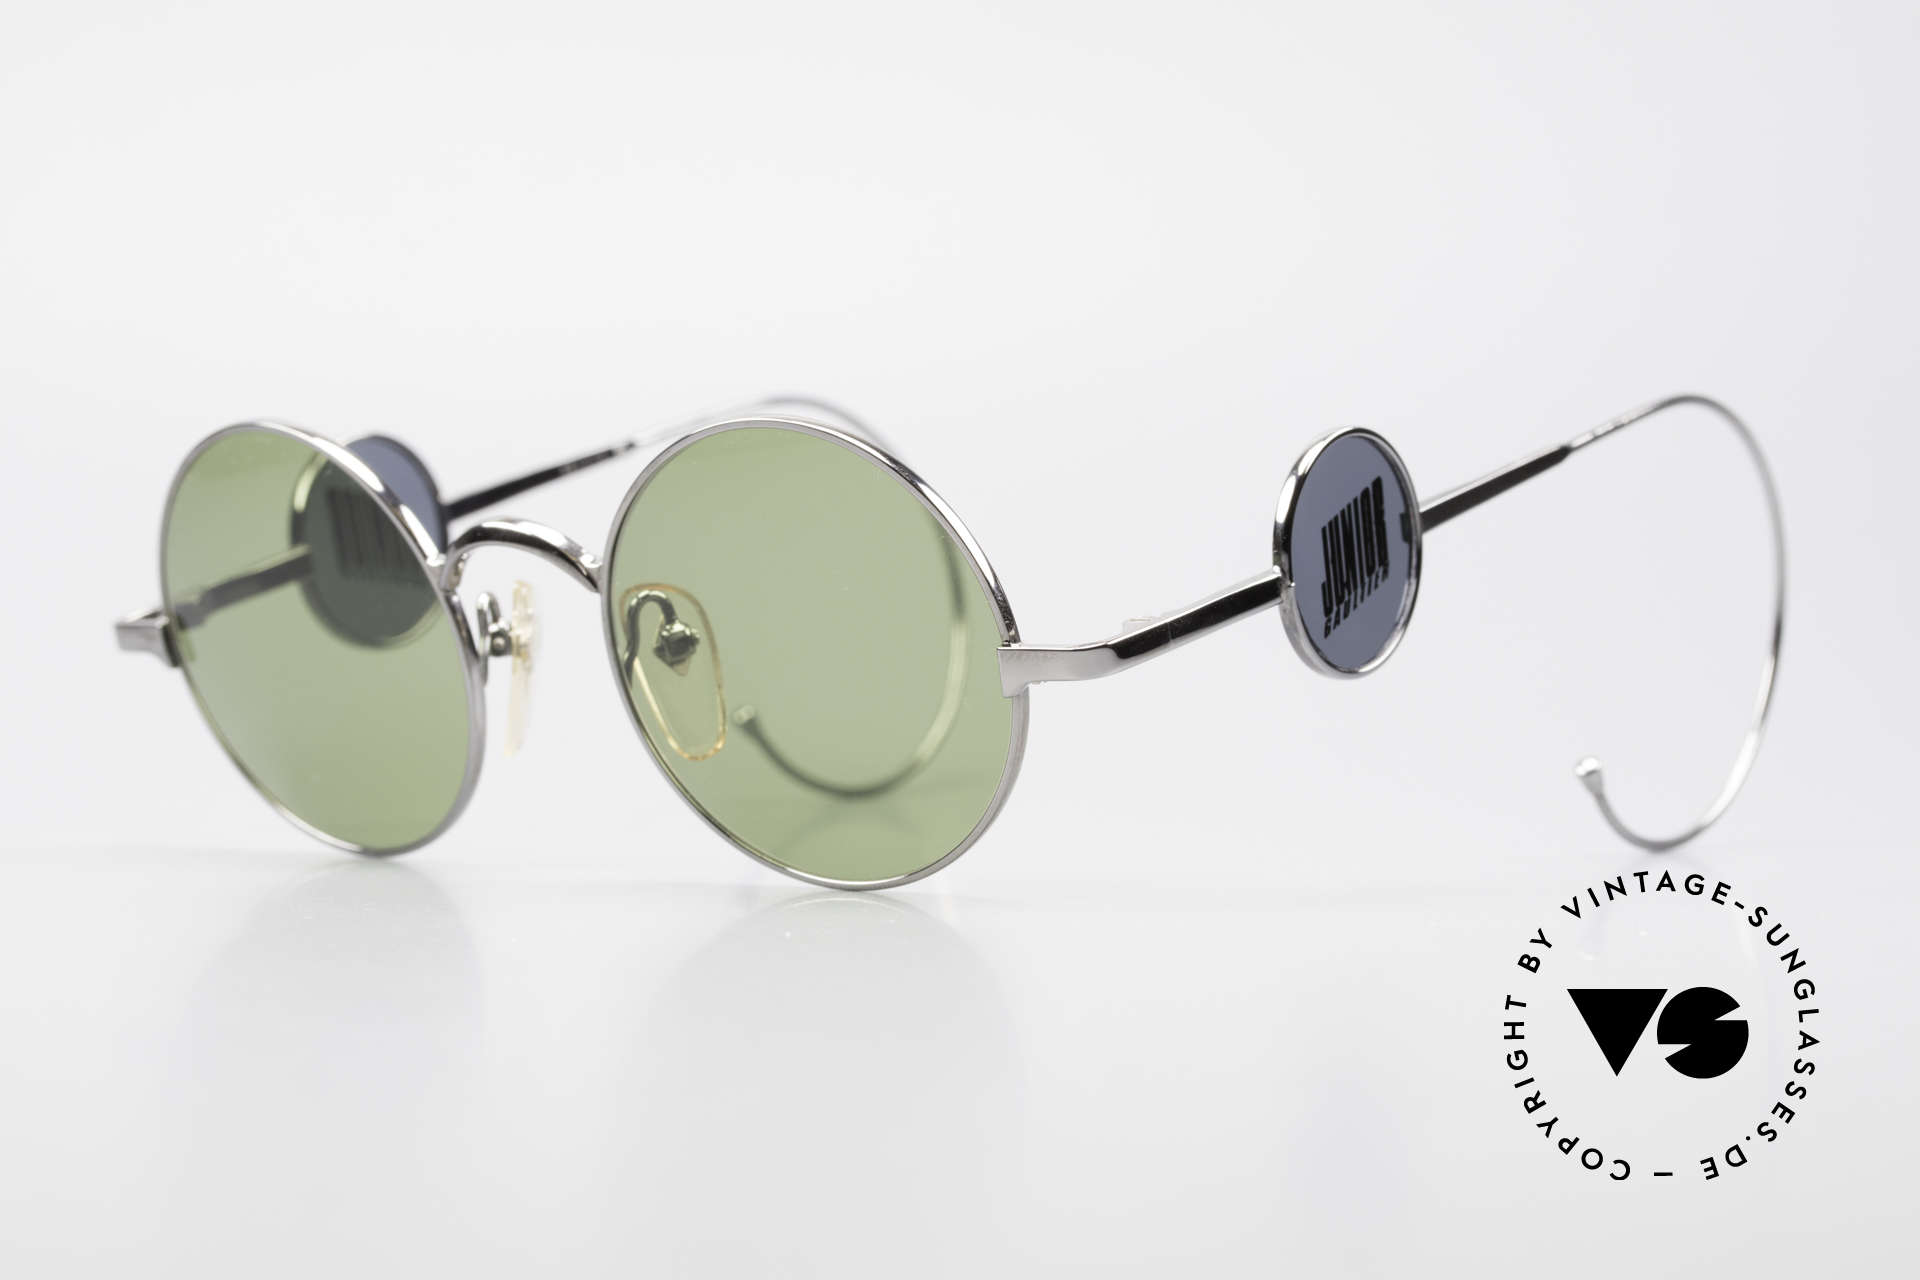 Jean Paul Gaultier 58-0103 4lens Design With Side Shields, a designer highlight from the 90's - just rare & fancy, Made for Men and Women